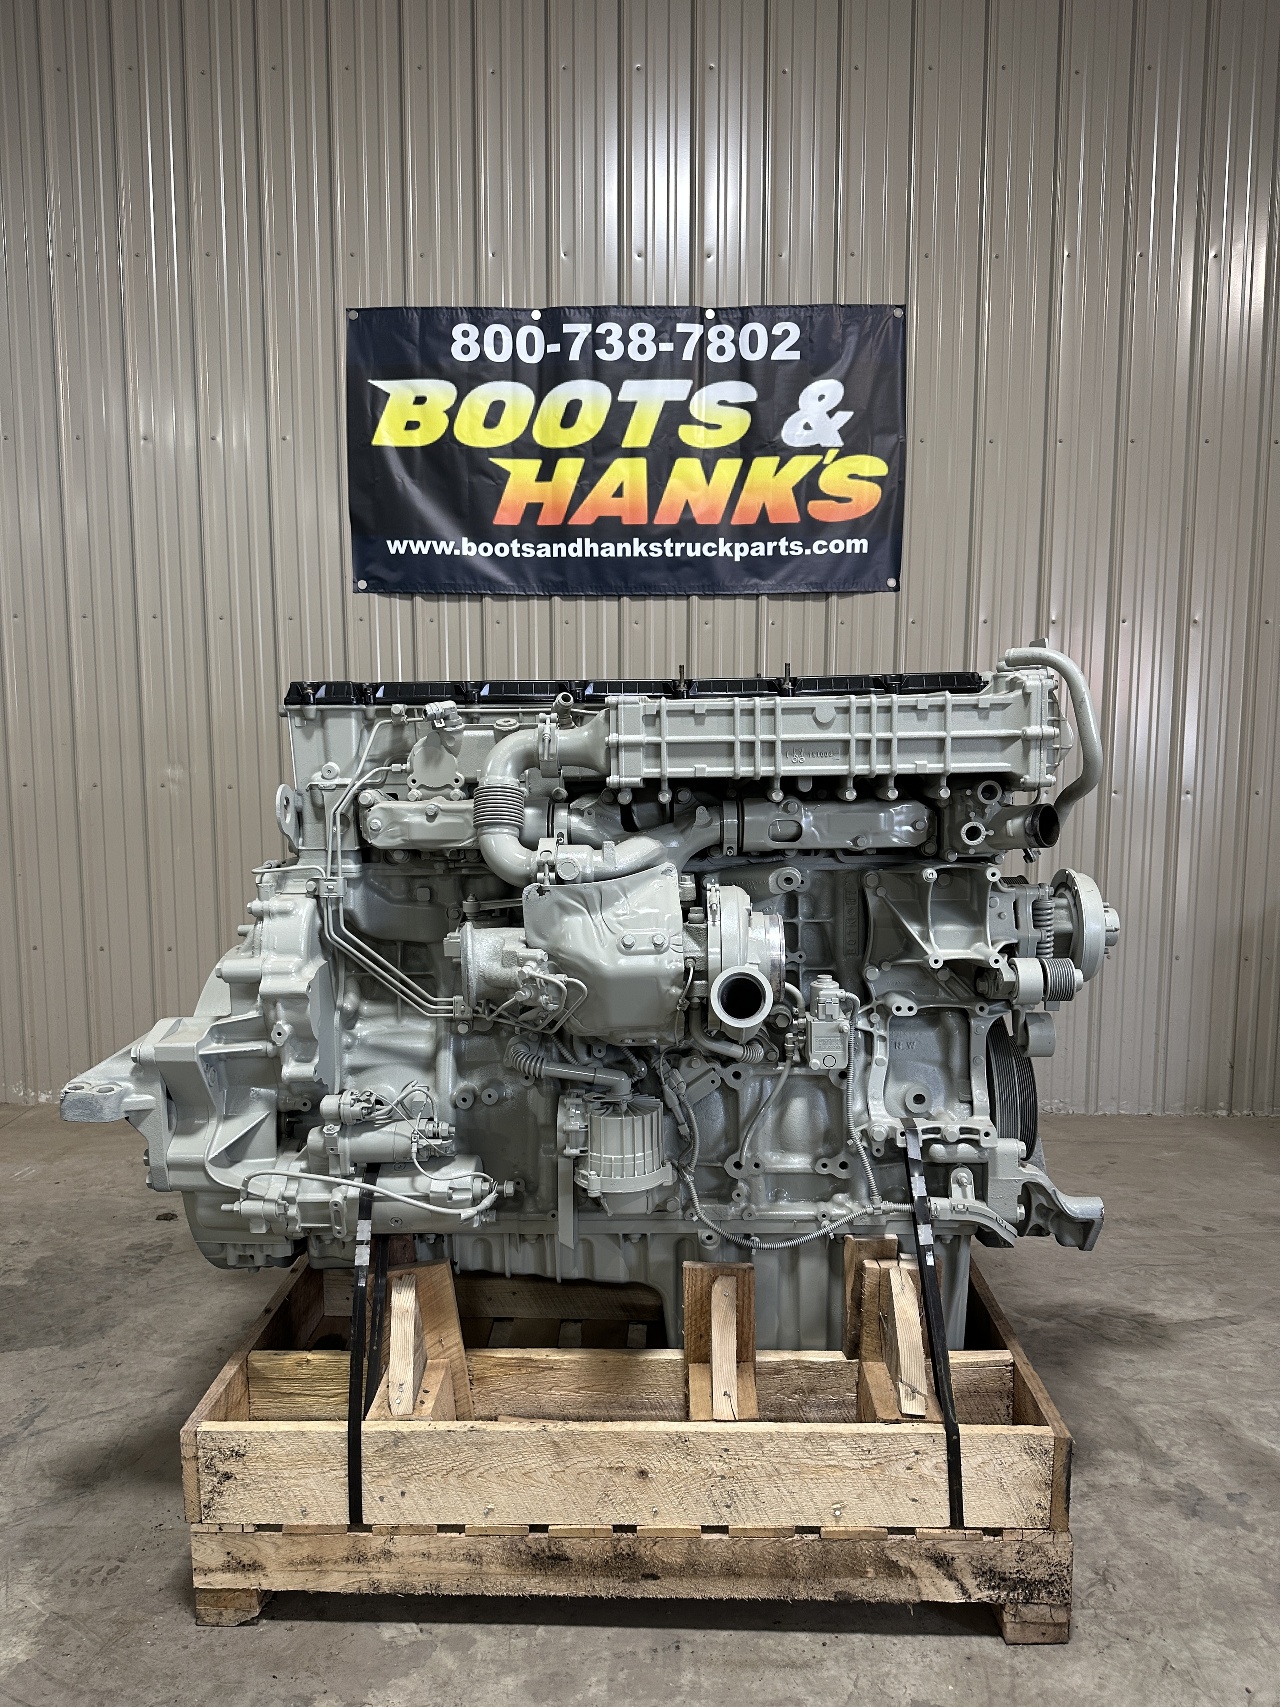 USED 2012 DETROIT DD13 COMPLETE ENGINE TRUCK PARTS #2006